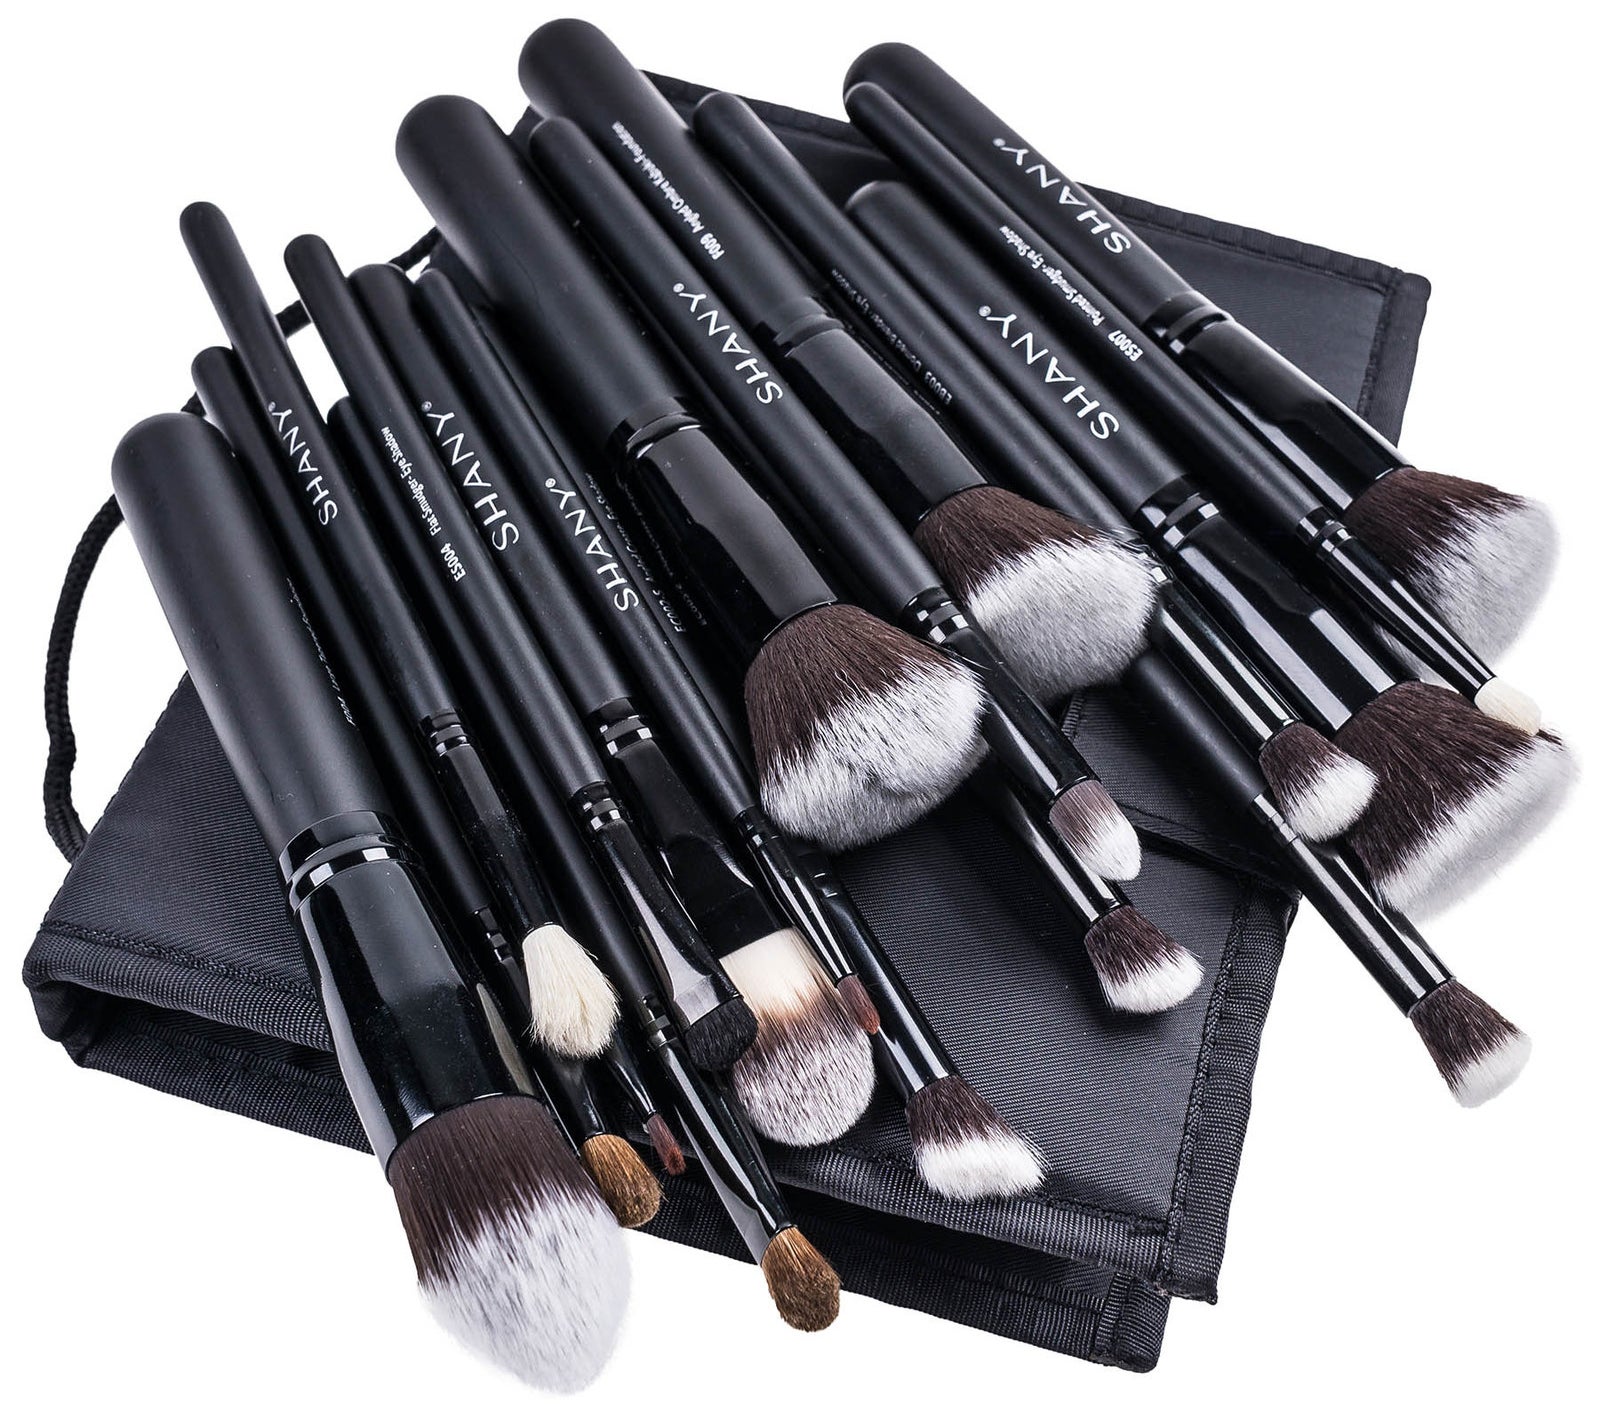 16 Of The Best Makeup Brushes And Sets You Can Get At Walmart